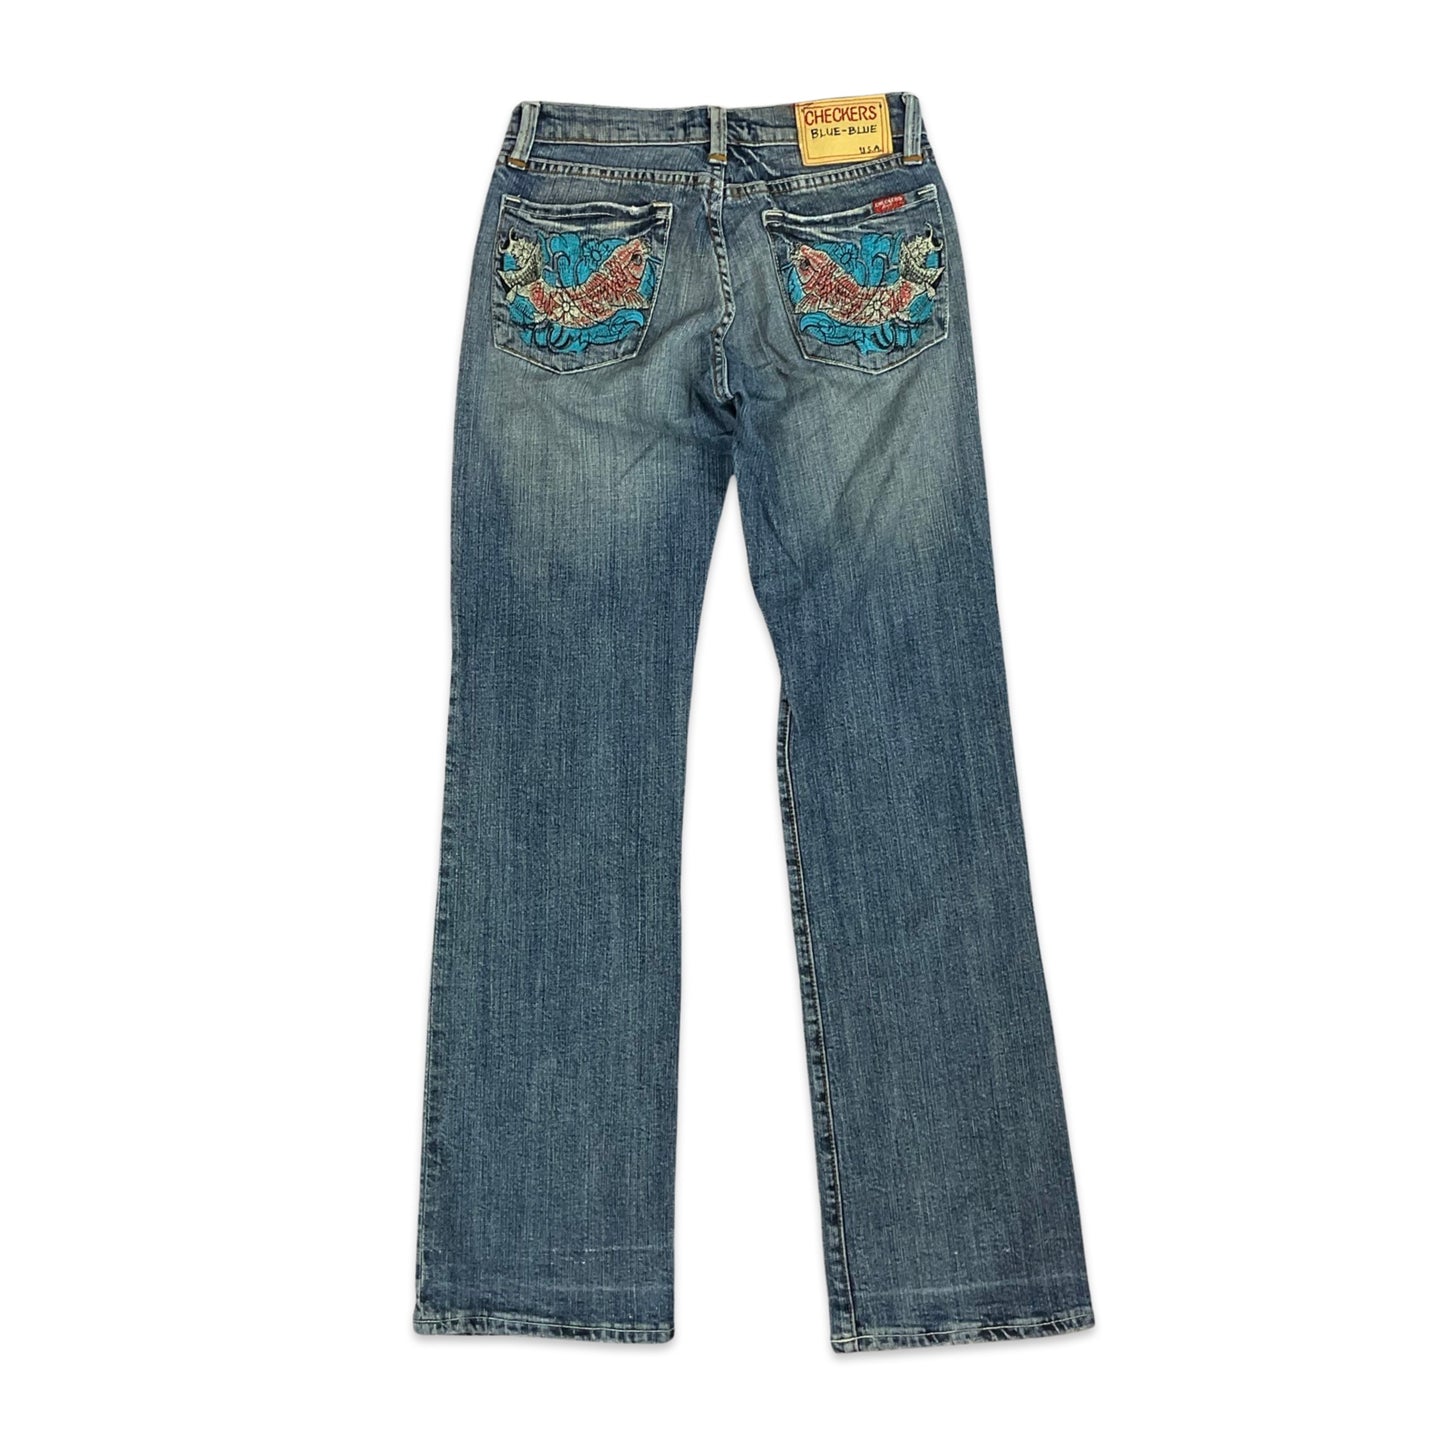 Y2K Light Blue Low Rise Straight Leg Jeans with Japanese Koi Carp Embroidery